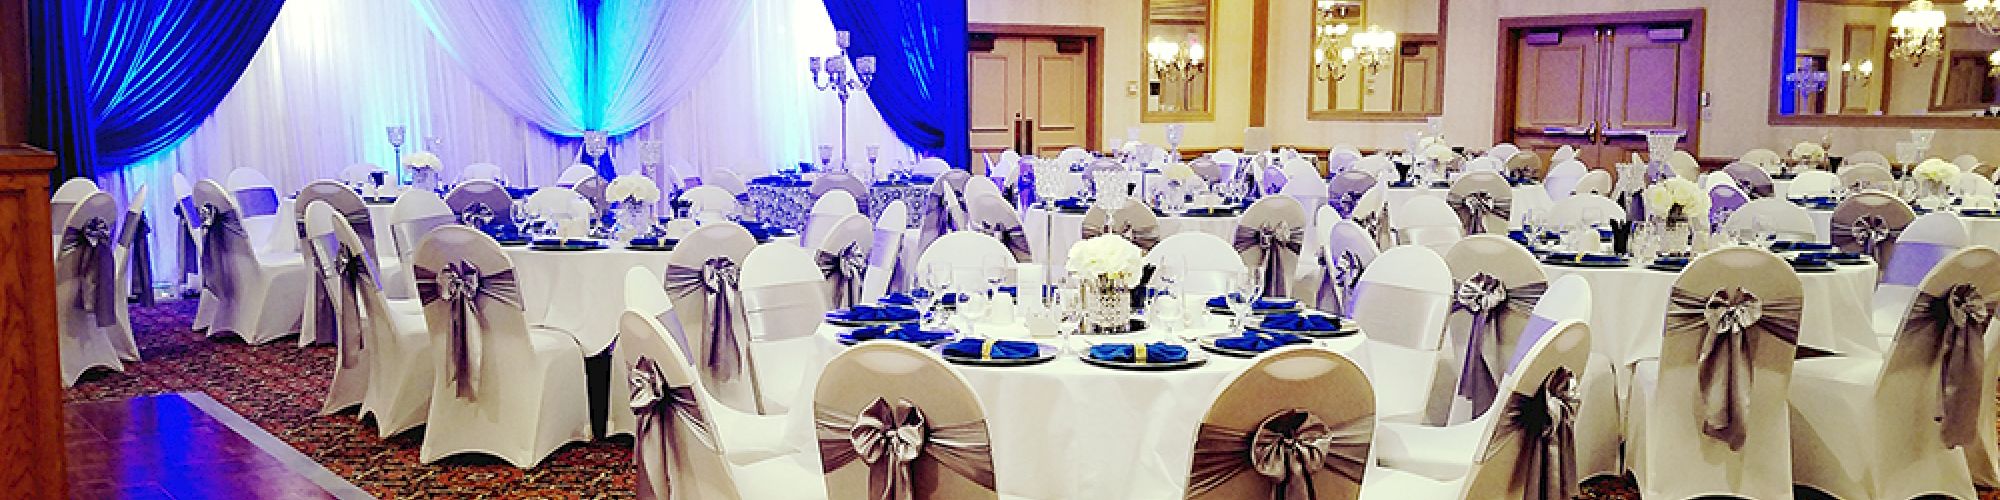 A beautifully decorated banquet hall with round tables, white chair covers, silver ribbons, chandeliers, and blue draped backdrop.